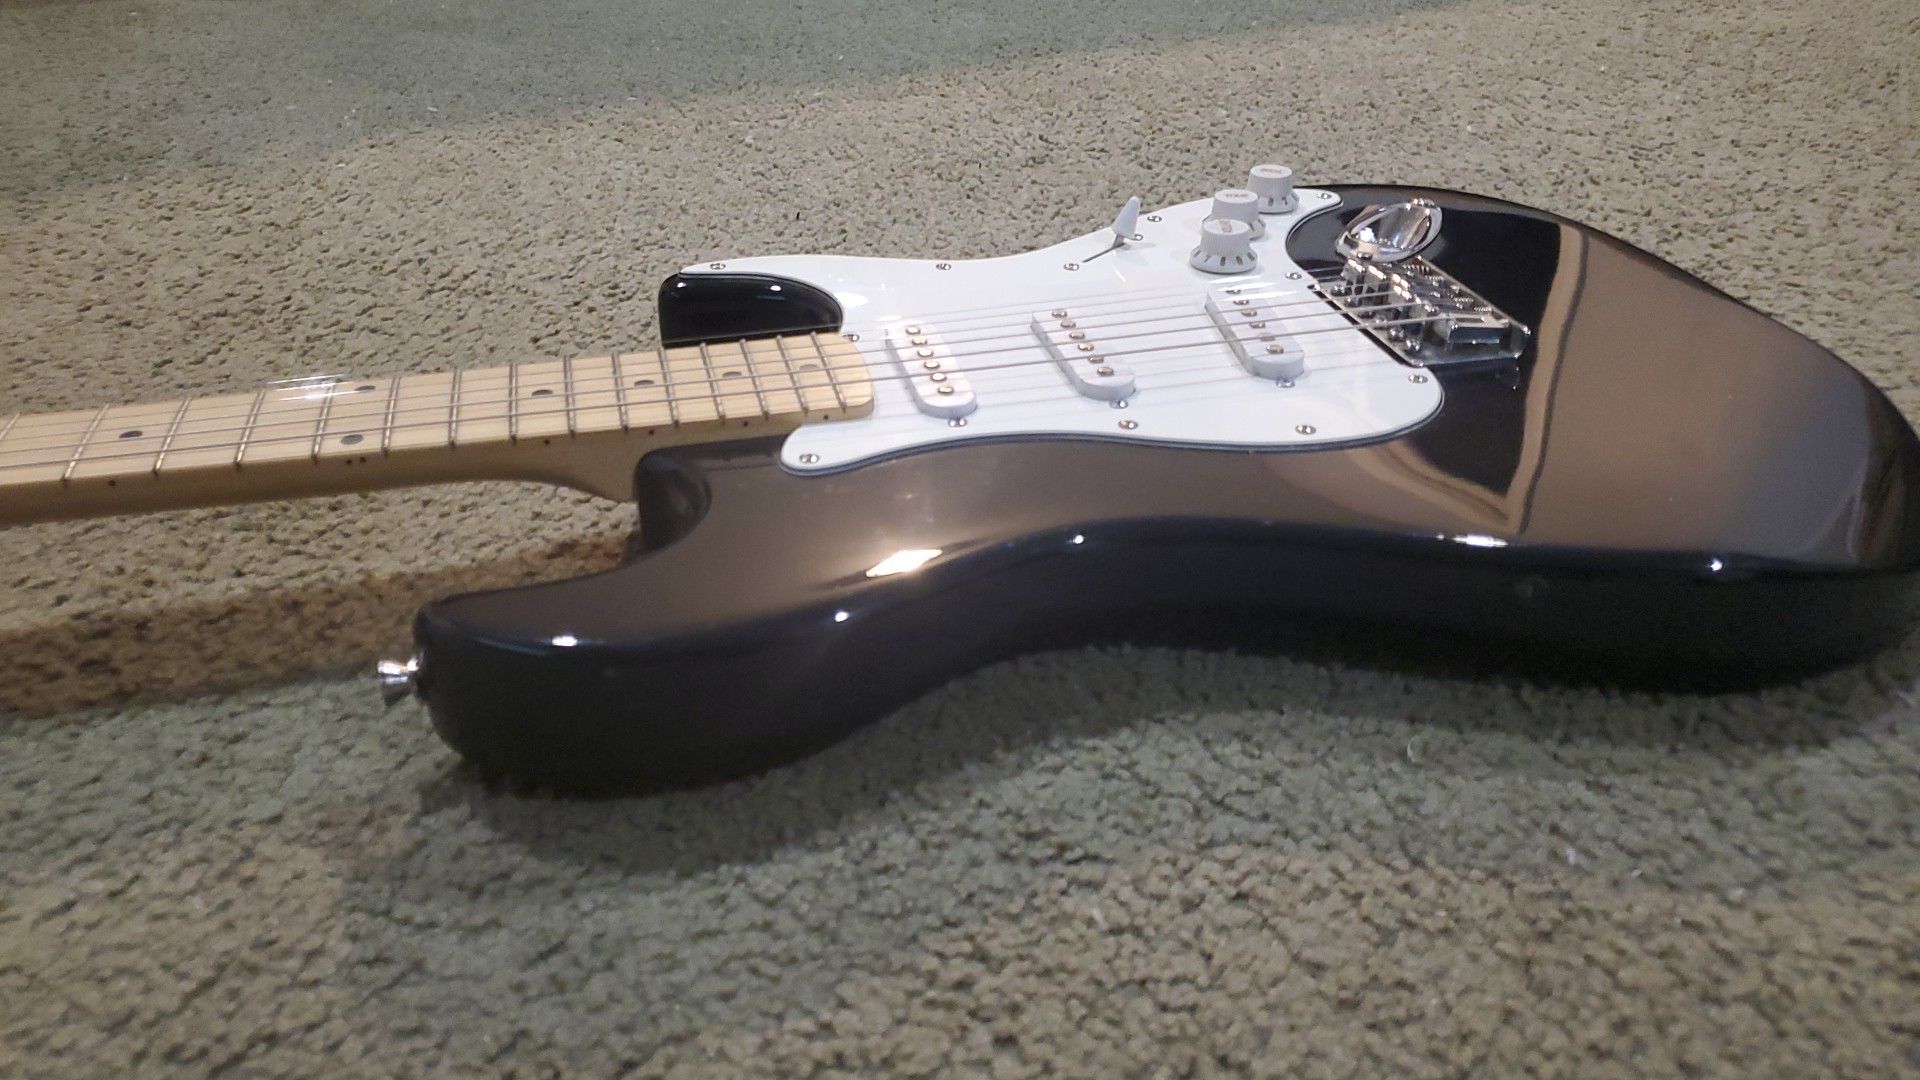 Stratocaster electric guitar classic style. New strings purchased 11/20/20